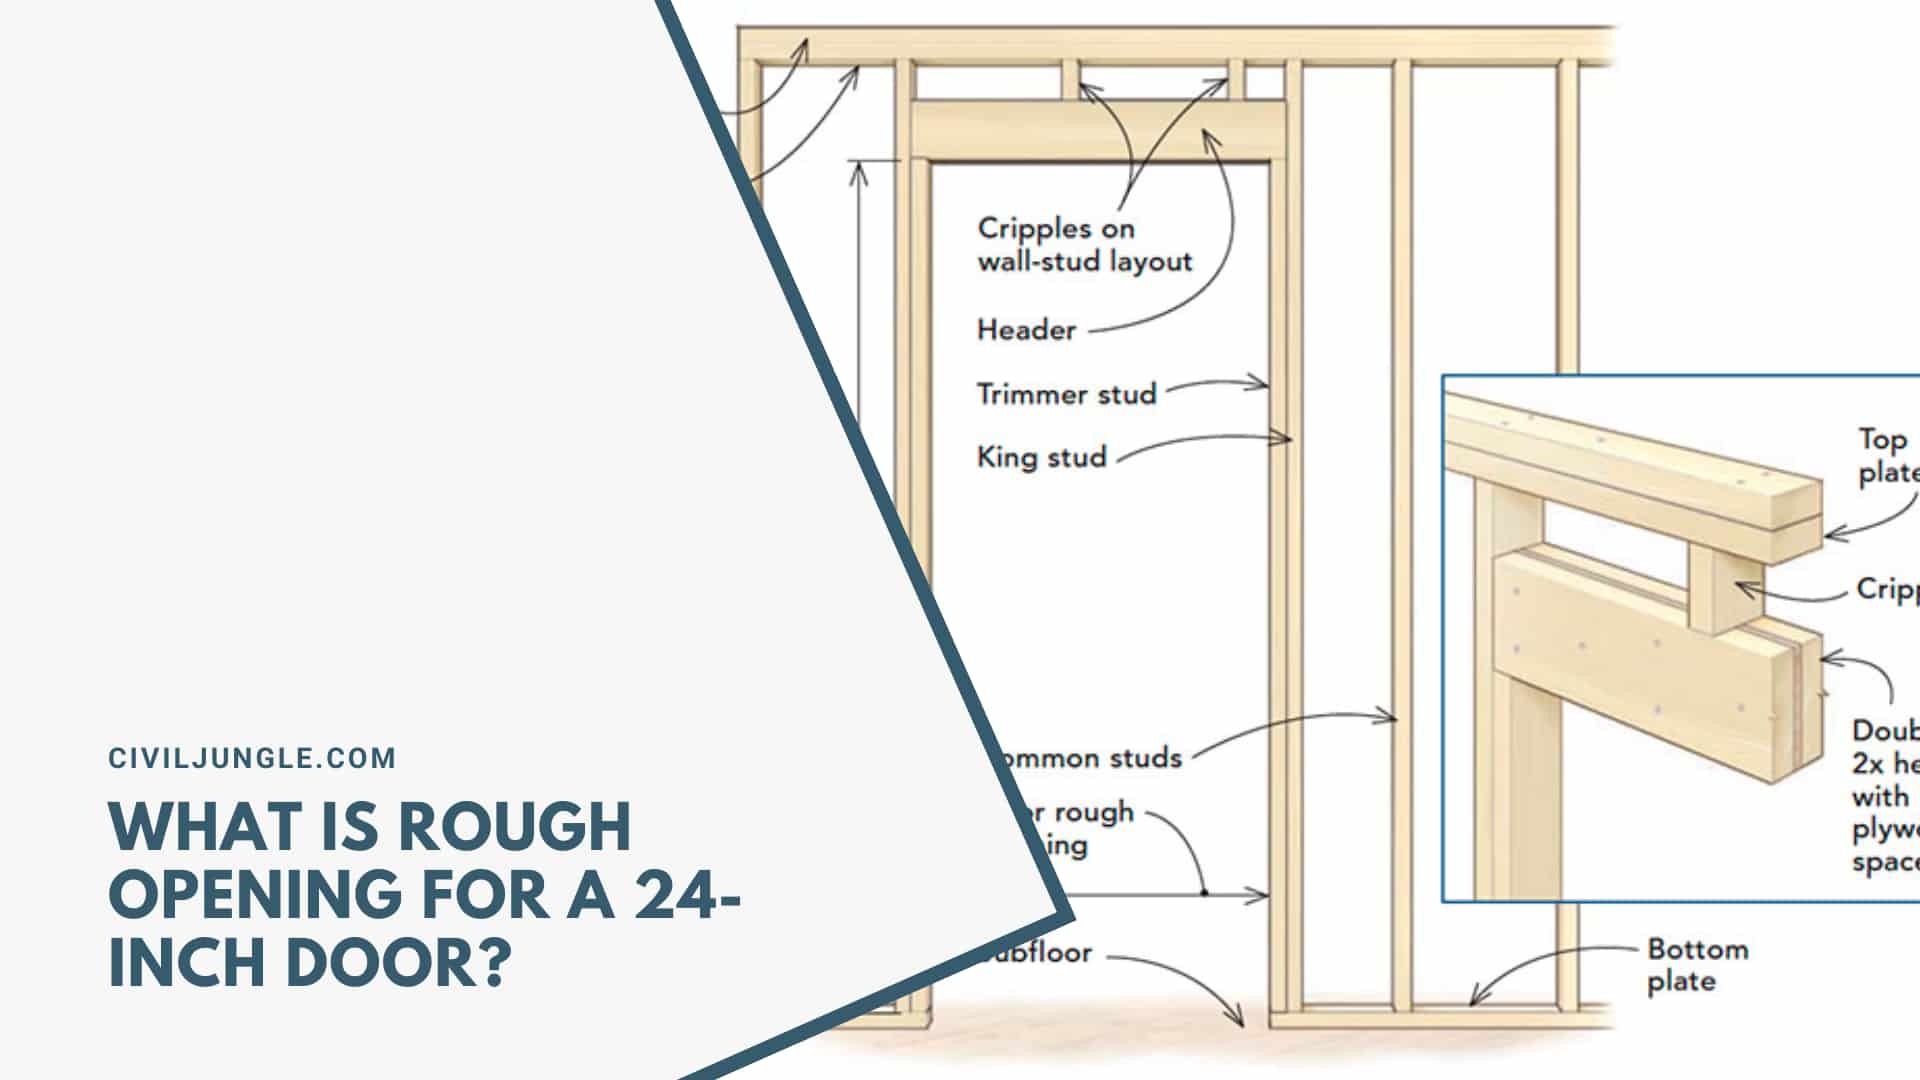 What Is Rough Opening for a 24-Inch Door?